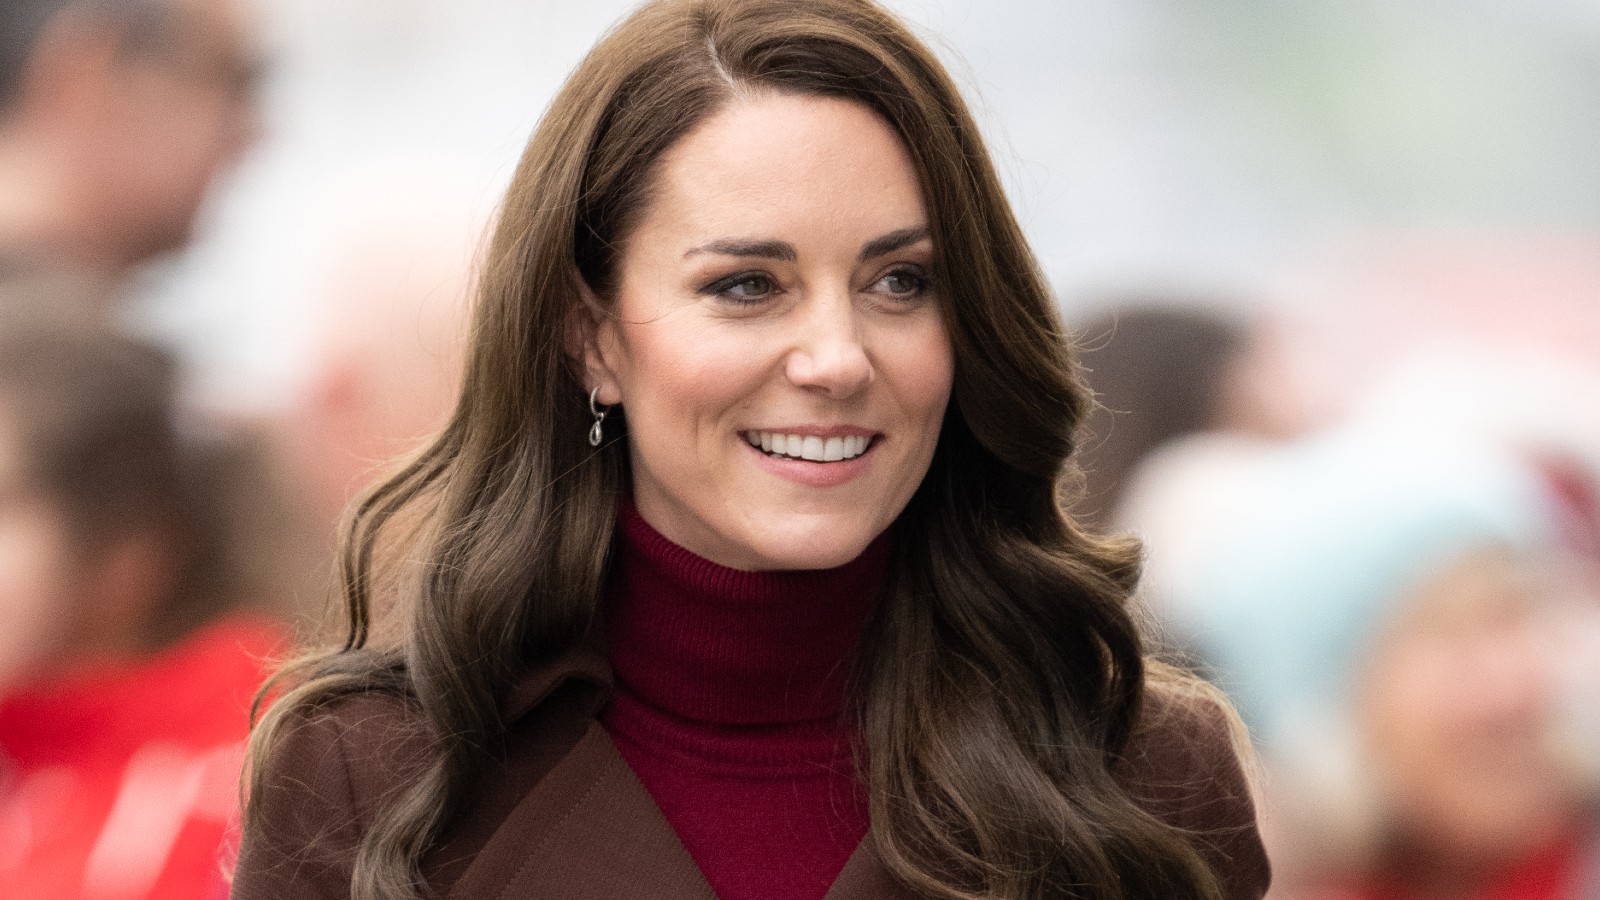 Kate Middleton's Love of Longchamp Tote Bags Is So Relatable